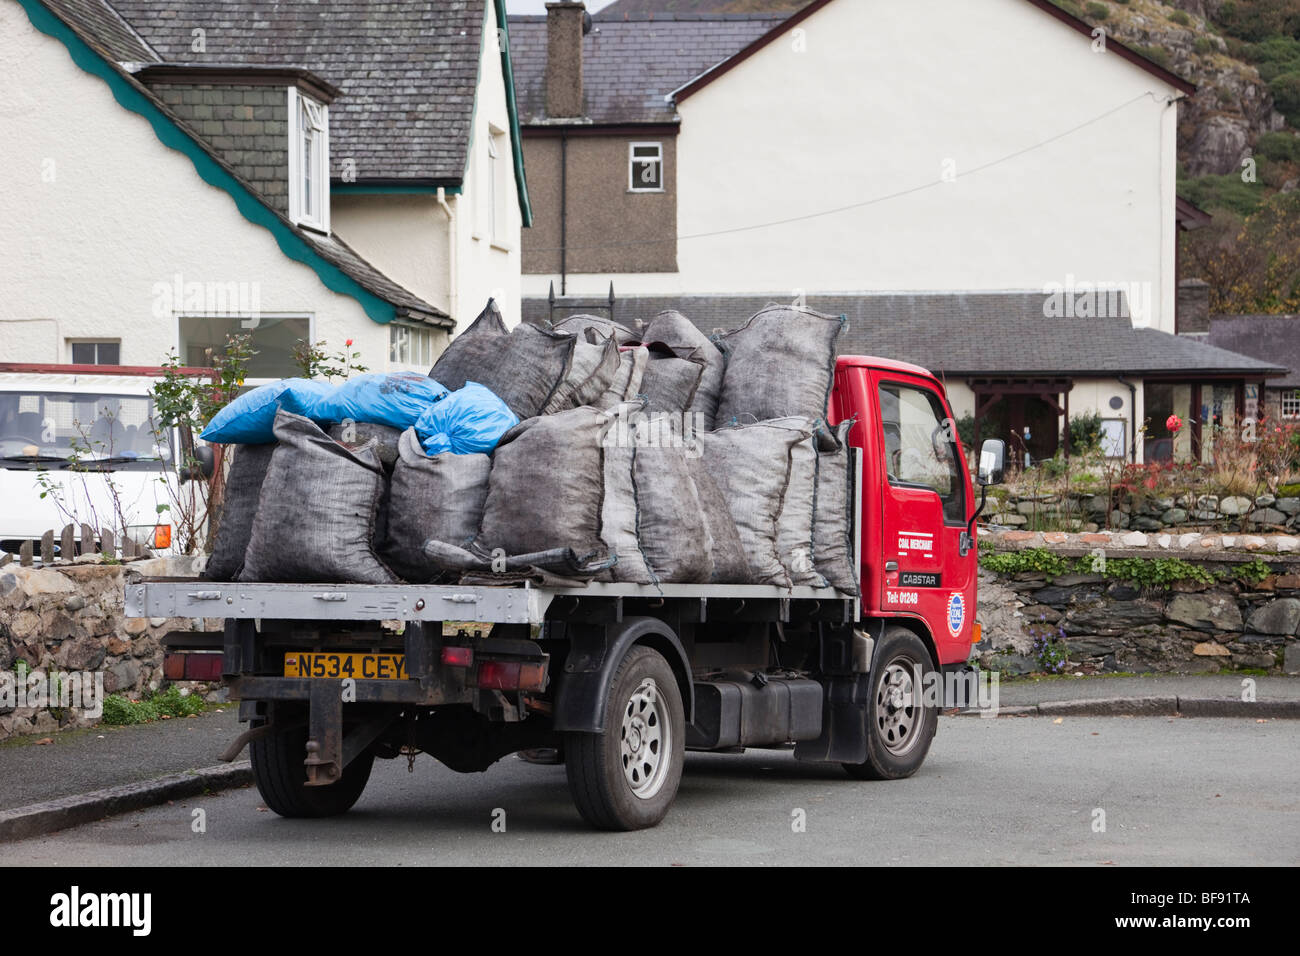 Coal merchant delivering to a house with sacks of fuel on a flatbed truck in the street. Wales, UK, Britain Stock Photo